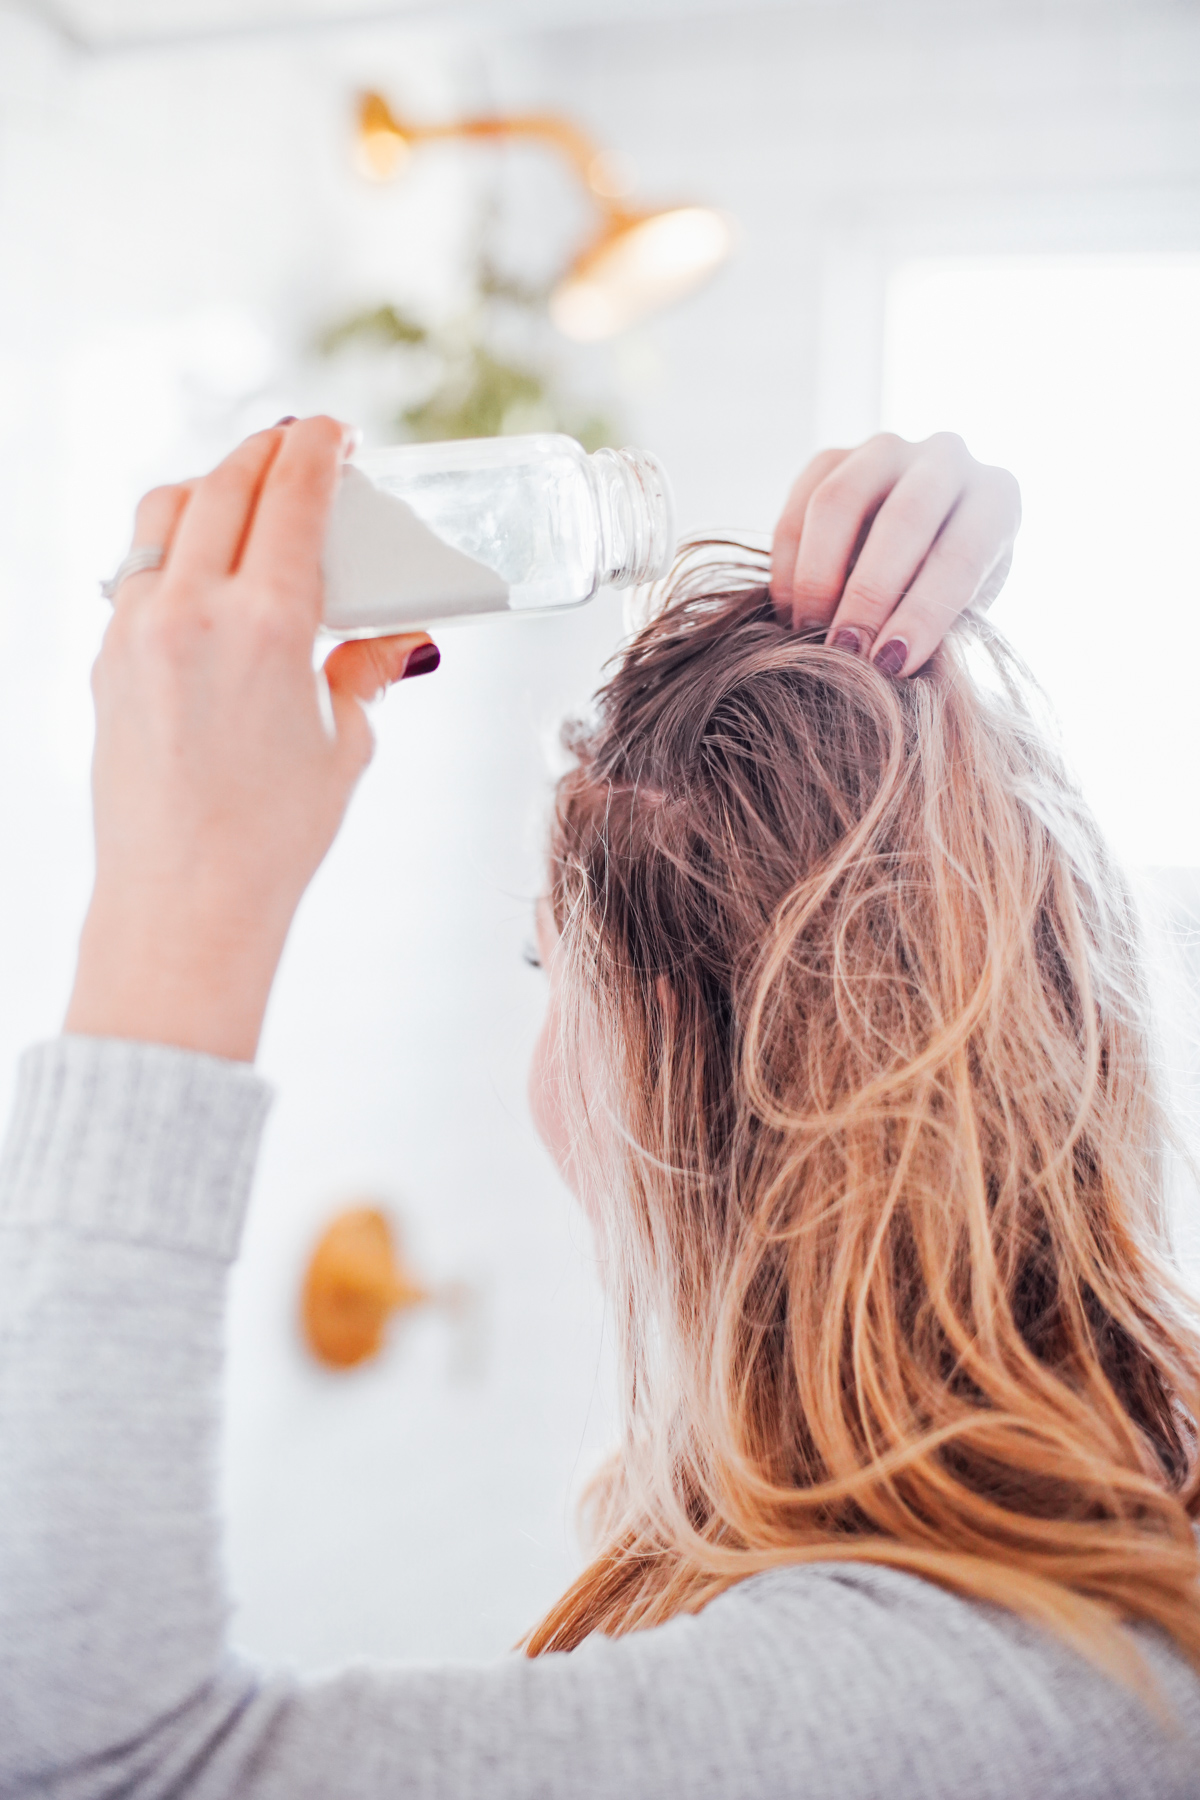 7 Best Natural Organic Dry Shampoos That Work